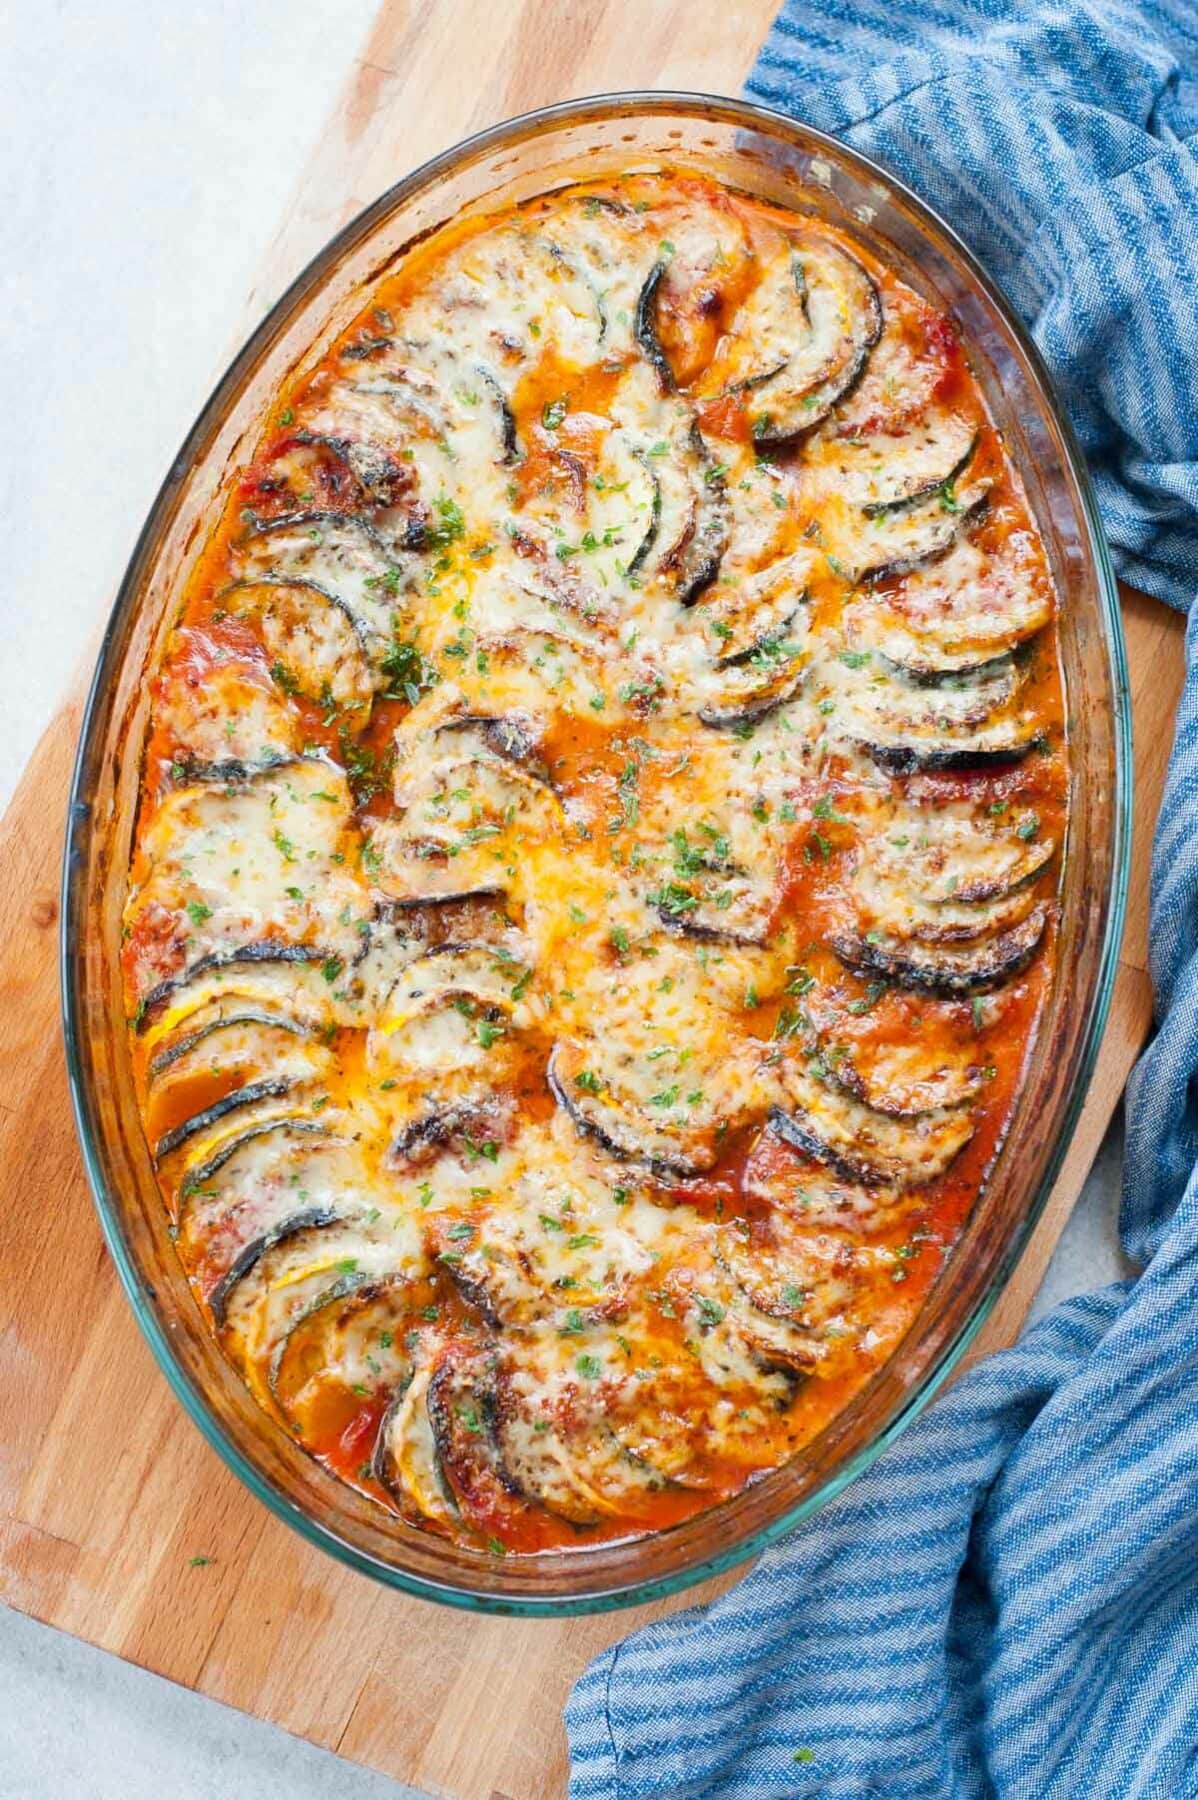 Baked ratatouille (confit byaldi) in a translucent baking dish, sprinkled with parsley.